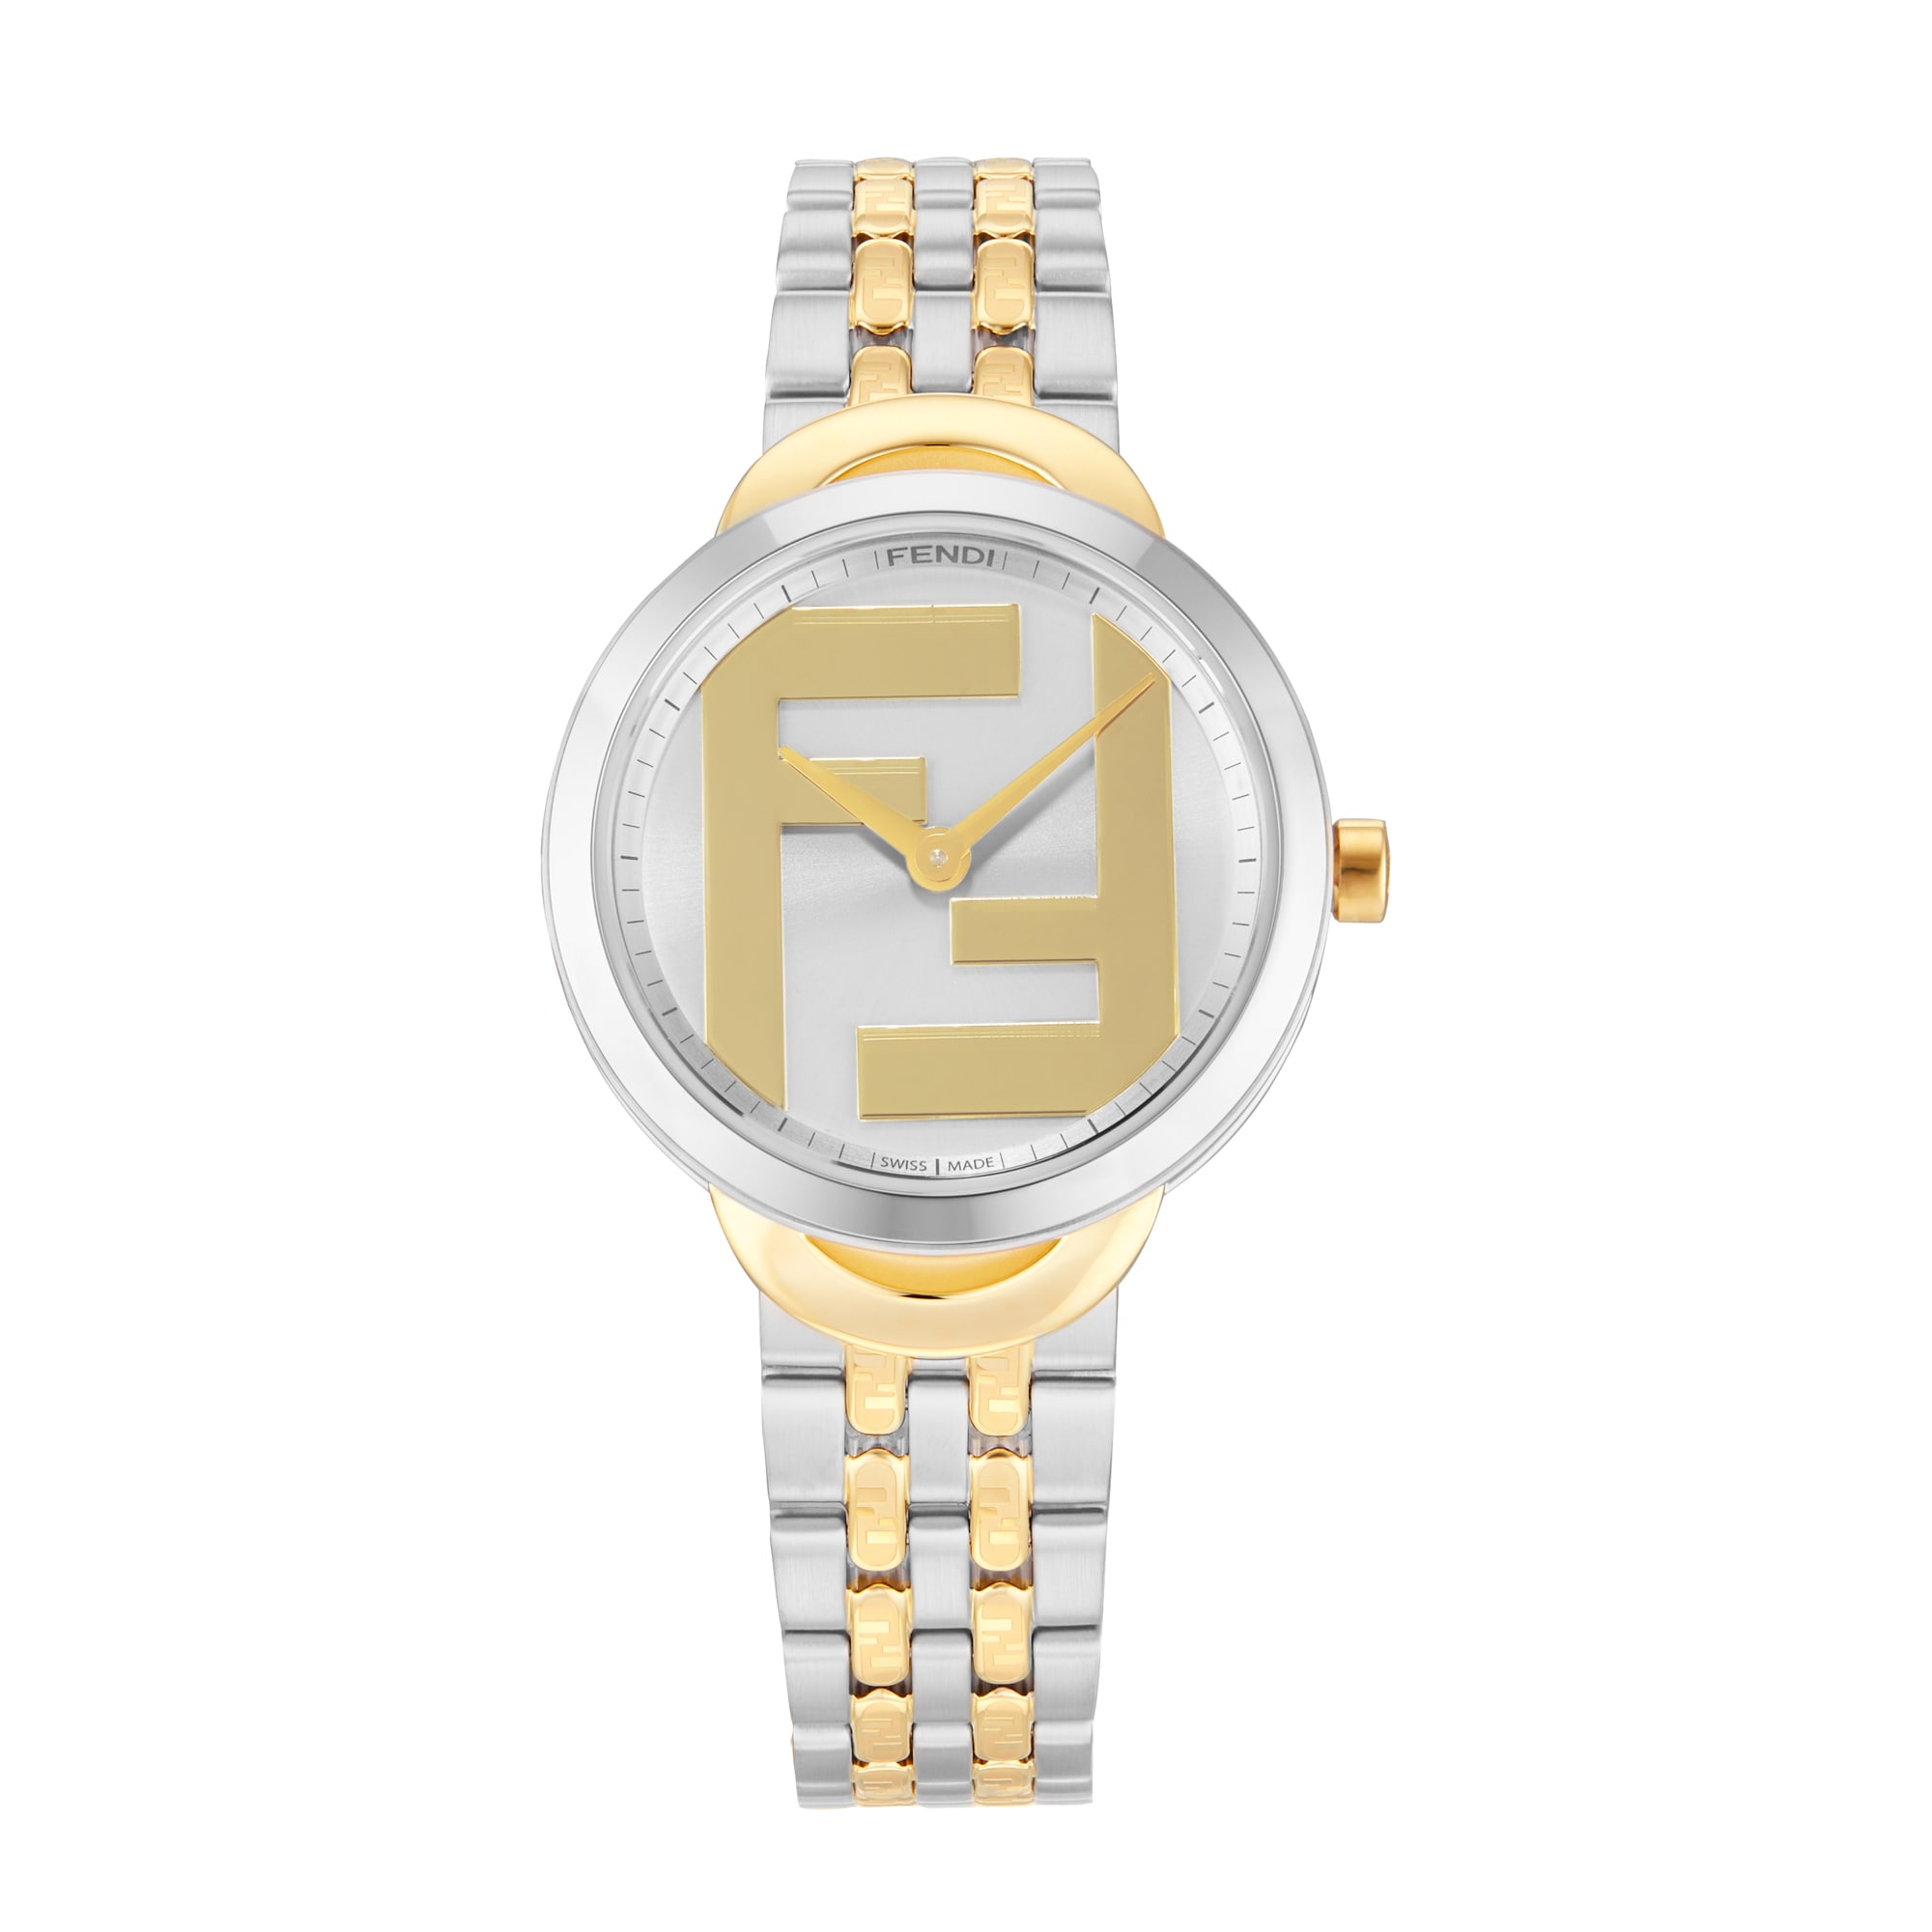 Forever Fendi Round 30mm Ladies Watch Gold Stainless Steel